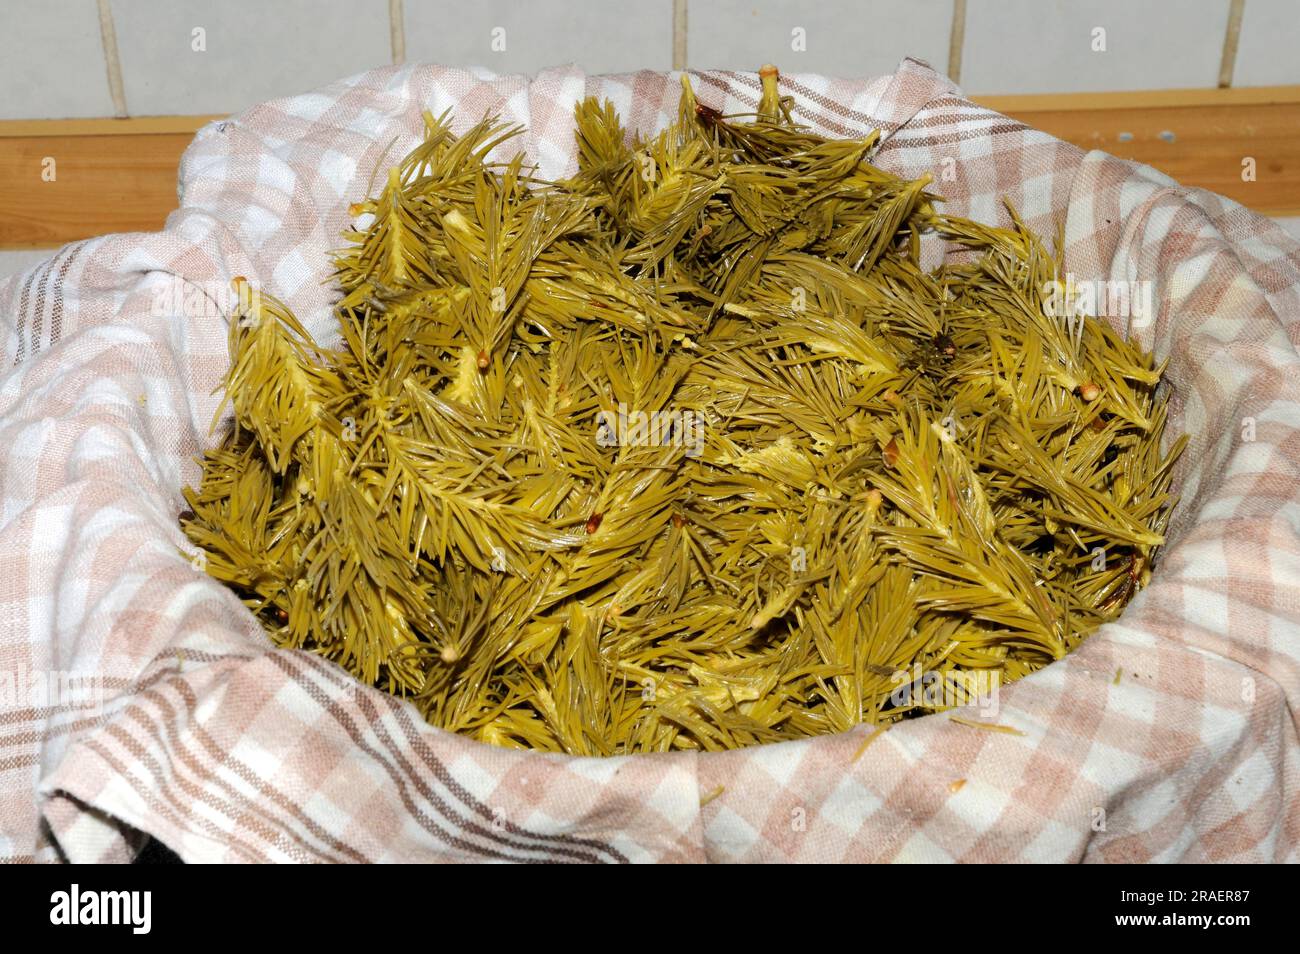 Production of spruce tip syrup (Picea abies), spruce tip syrup Stock Photo